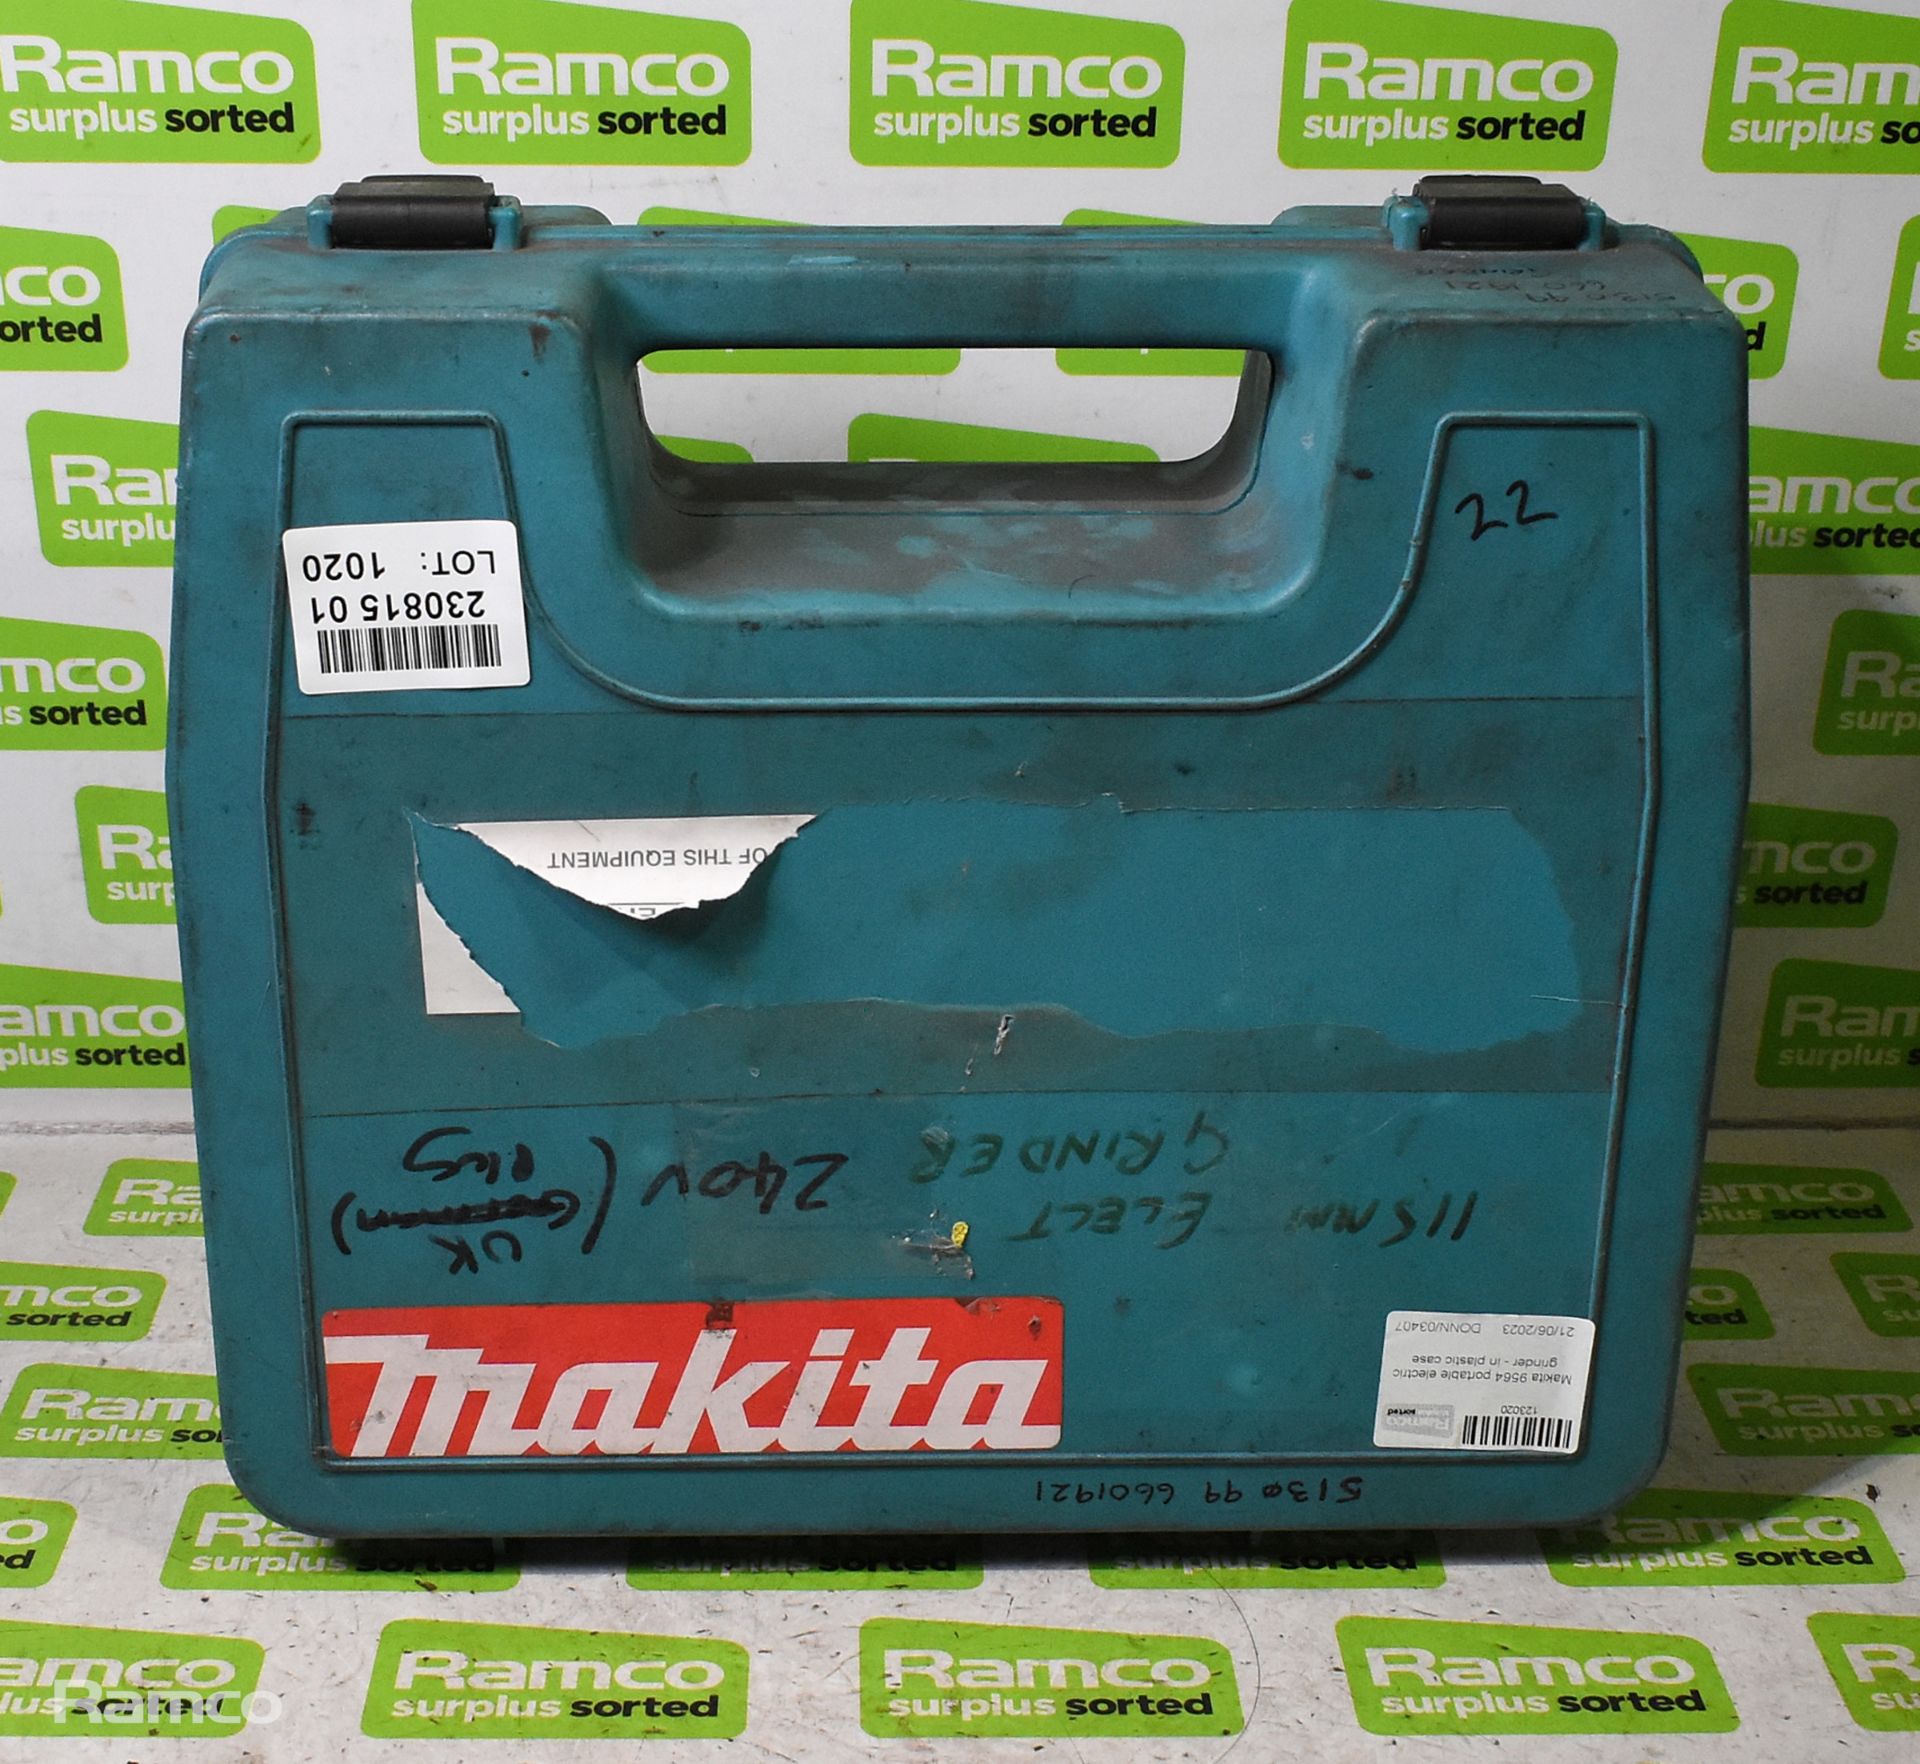 Makita 9564 portable electric grinder - in plastic case - Image 6 of 6